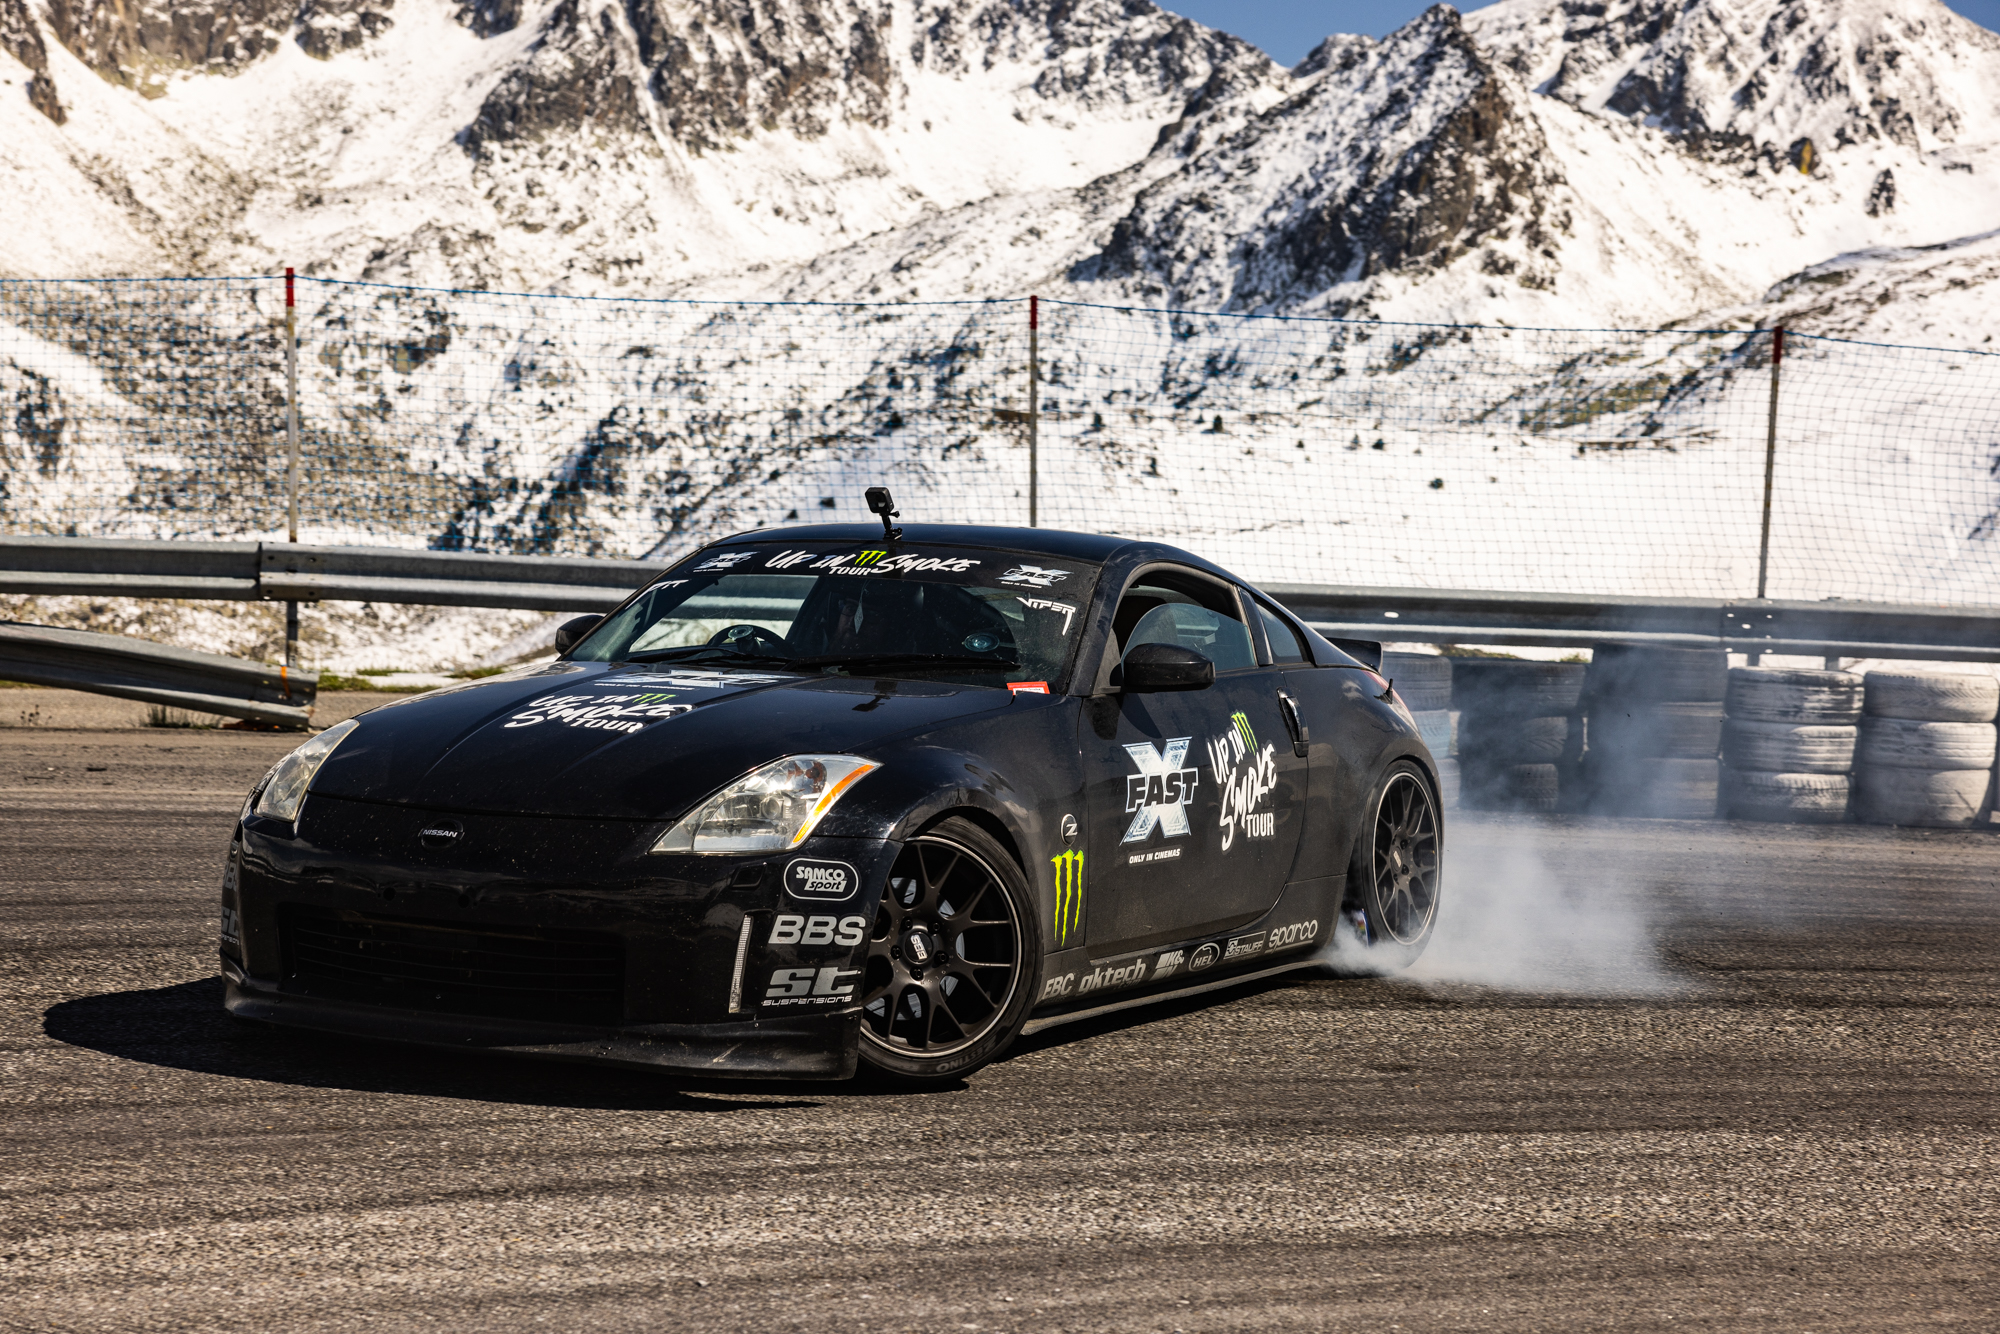 Pro Drifter Baggsy Completes 2000-Mile ‘Up in Smoke’ Drift Tour with Help of EBC